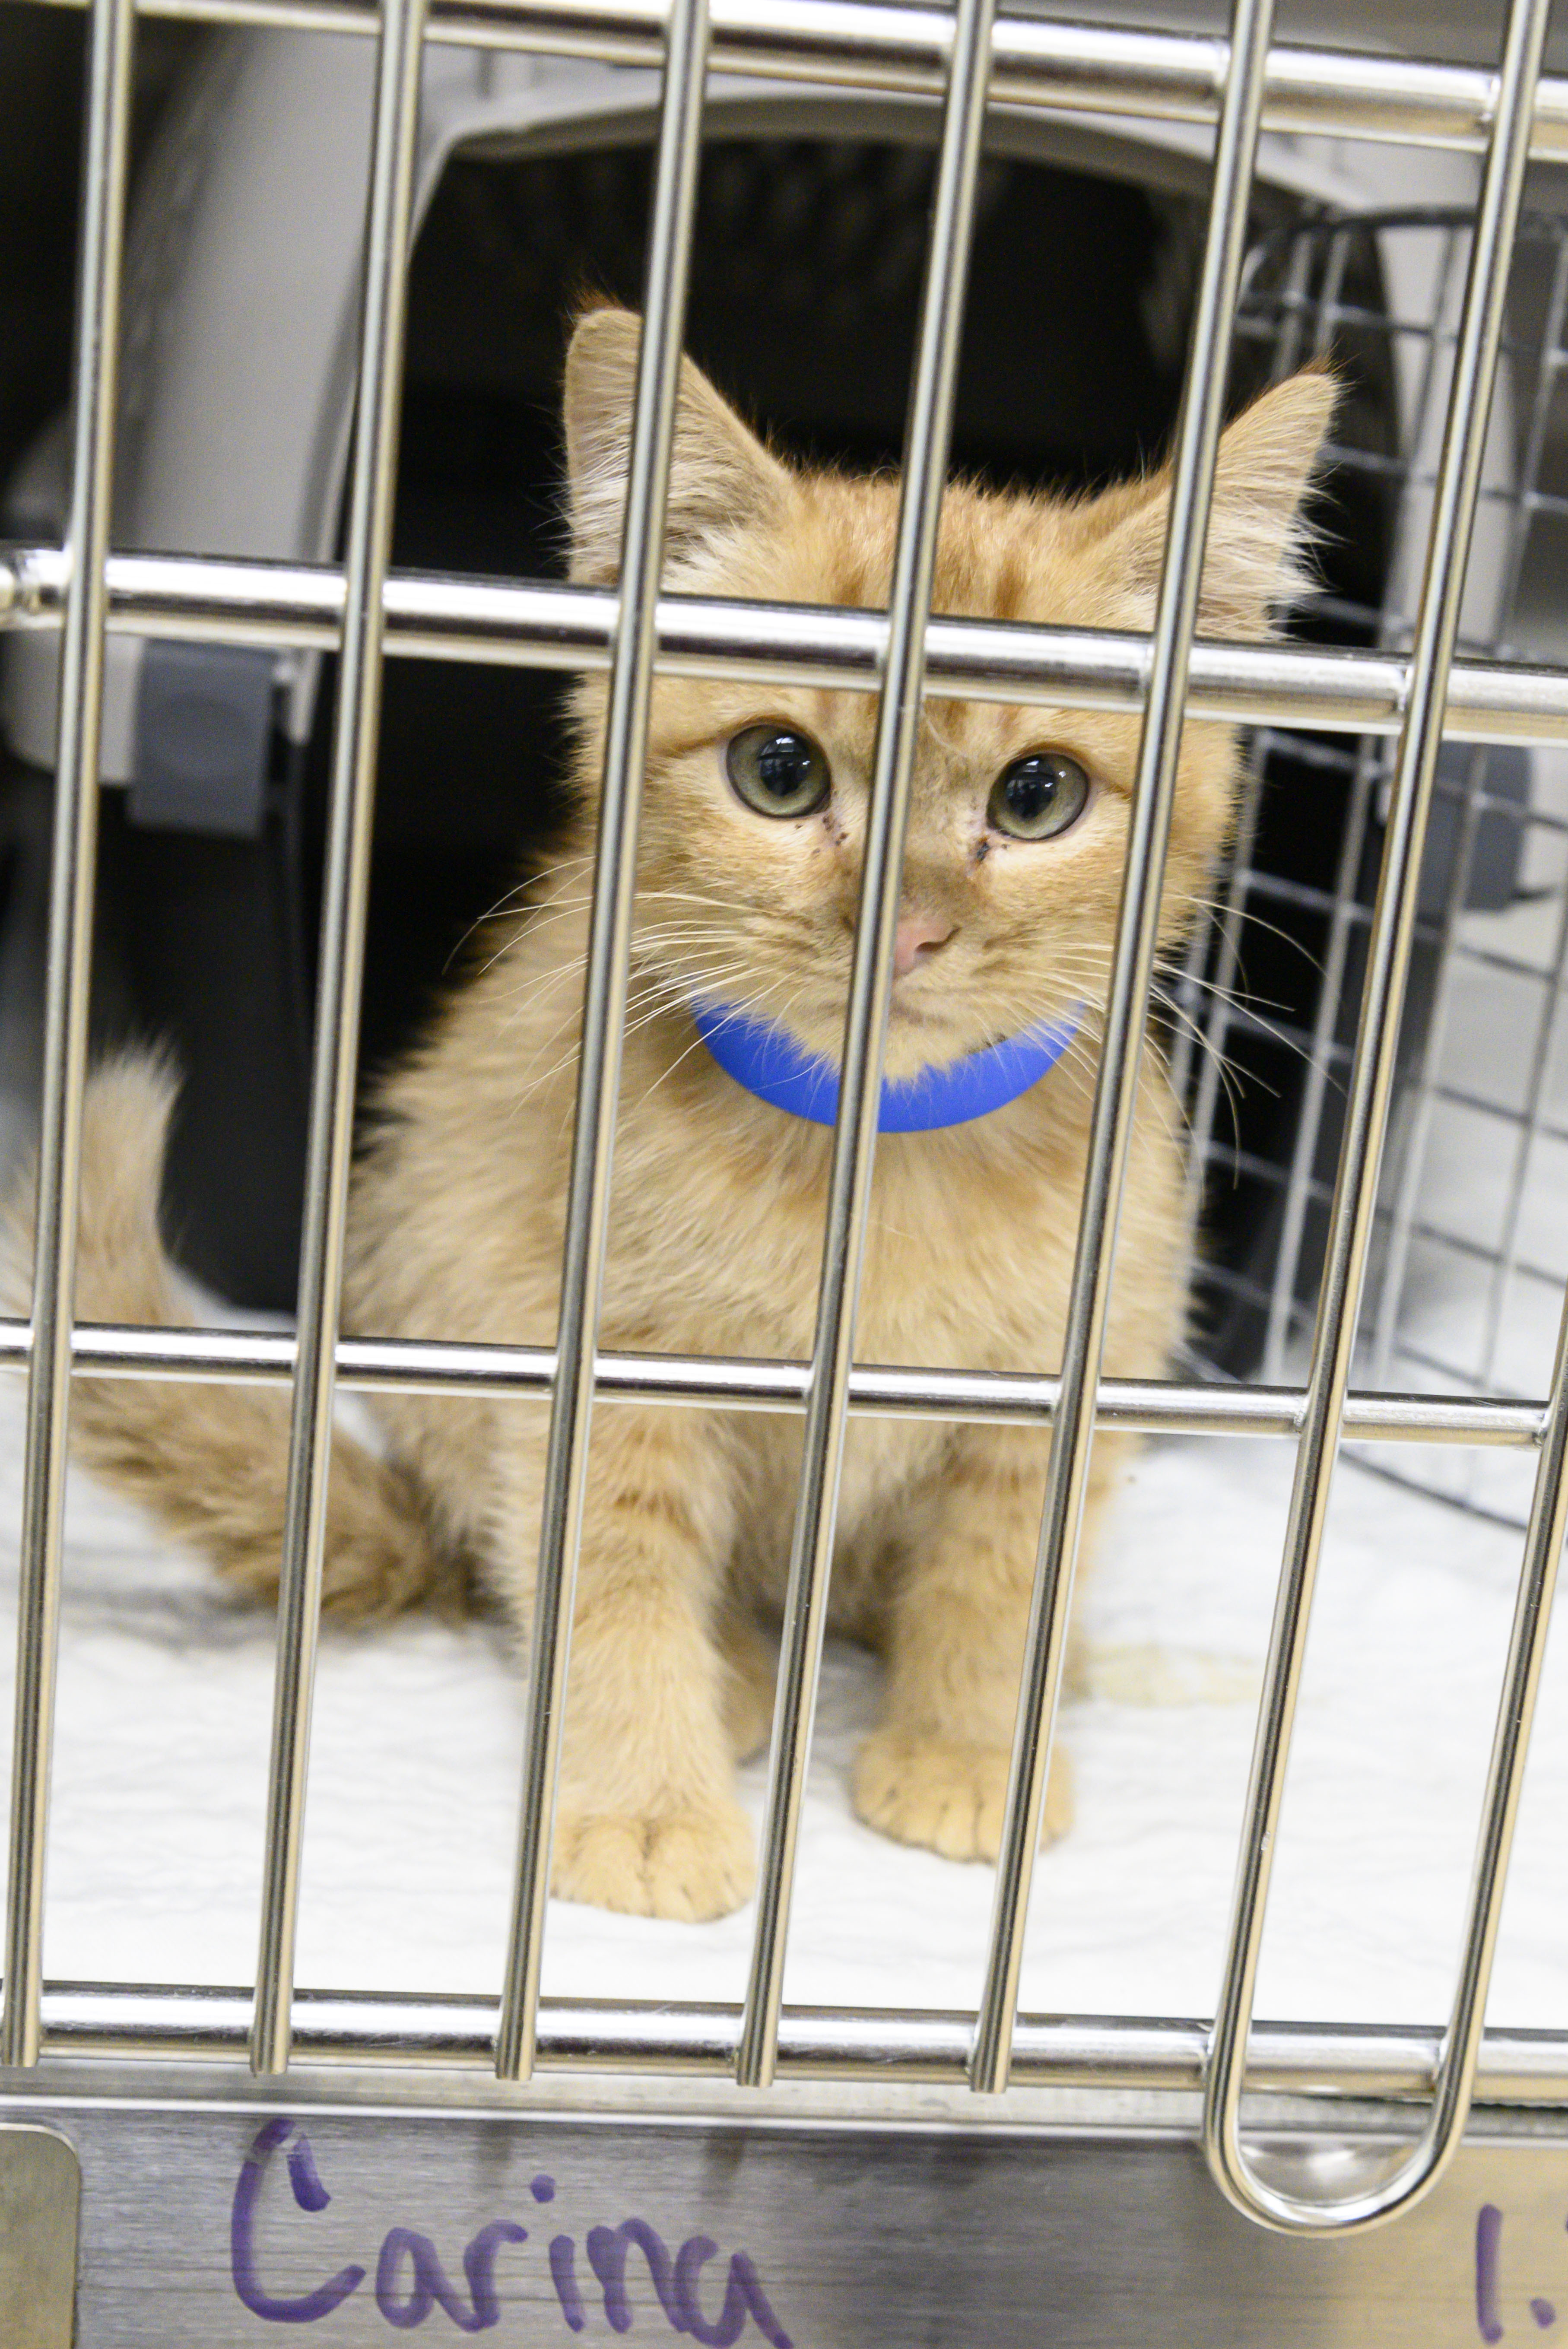 A shelter kitten in its kennel